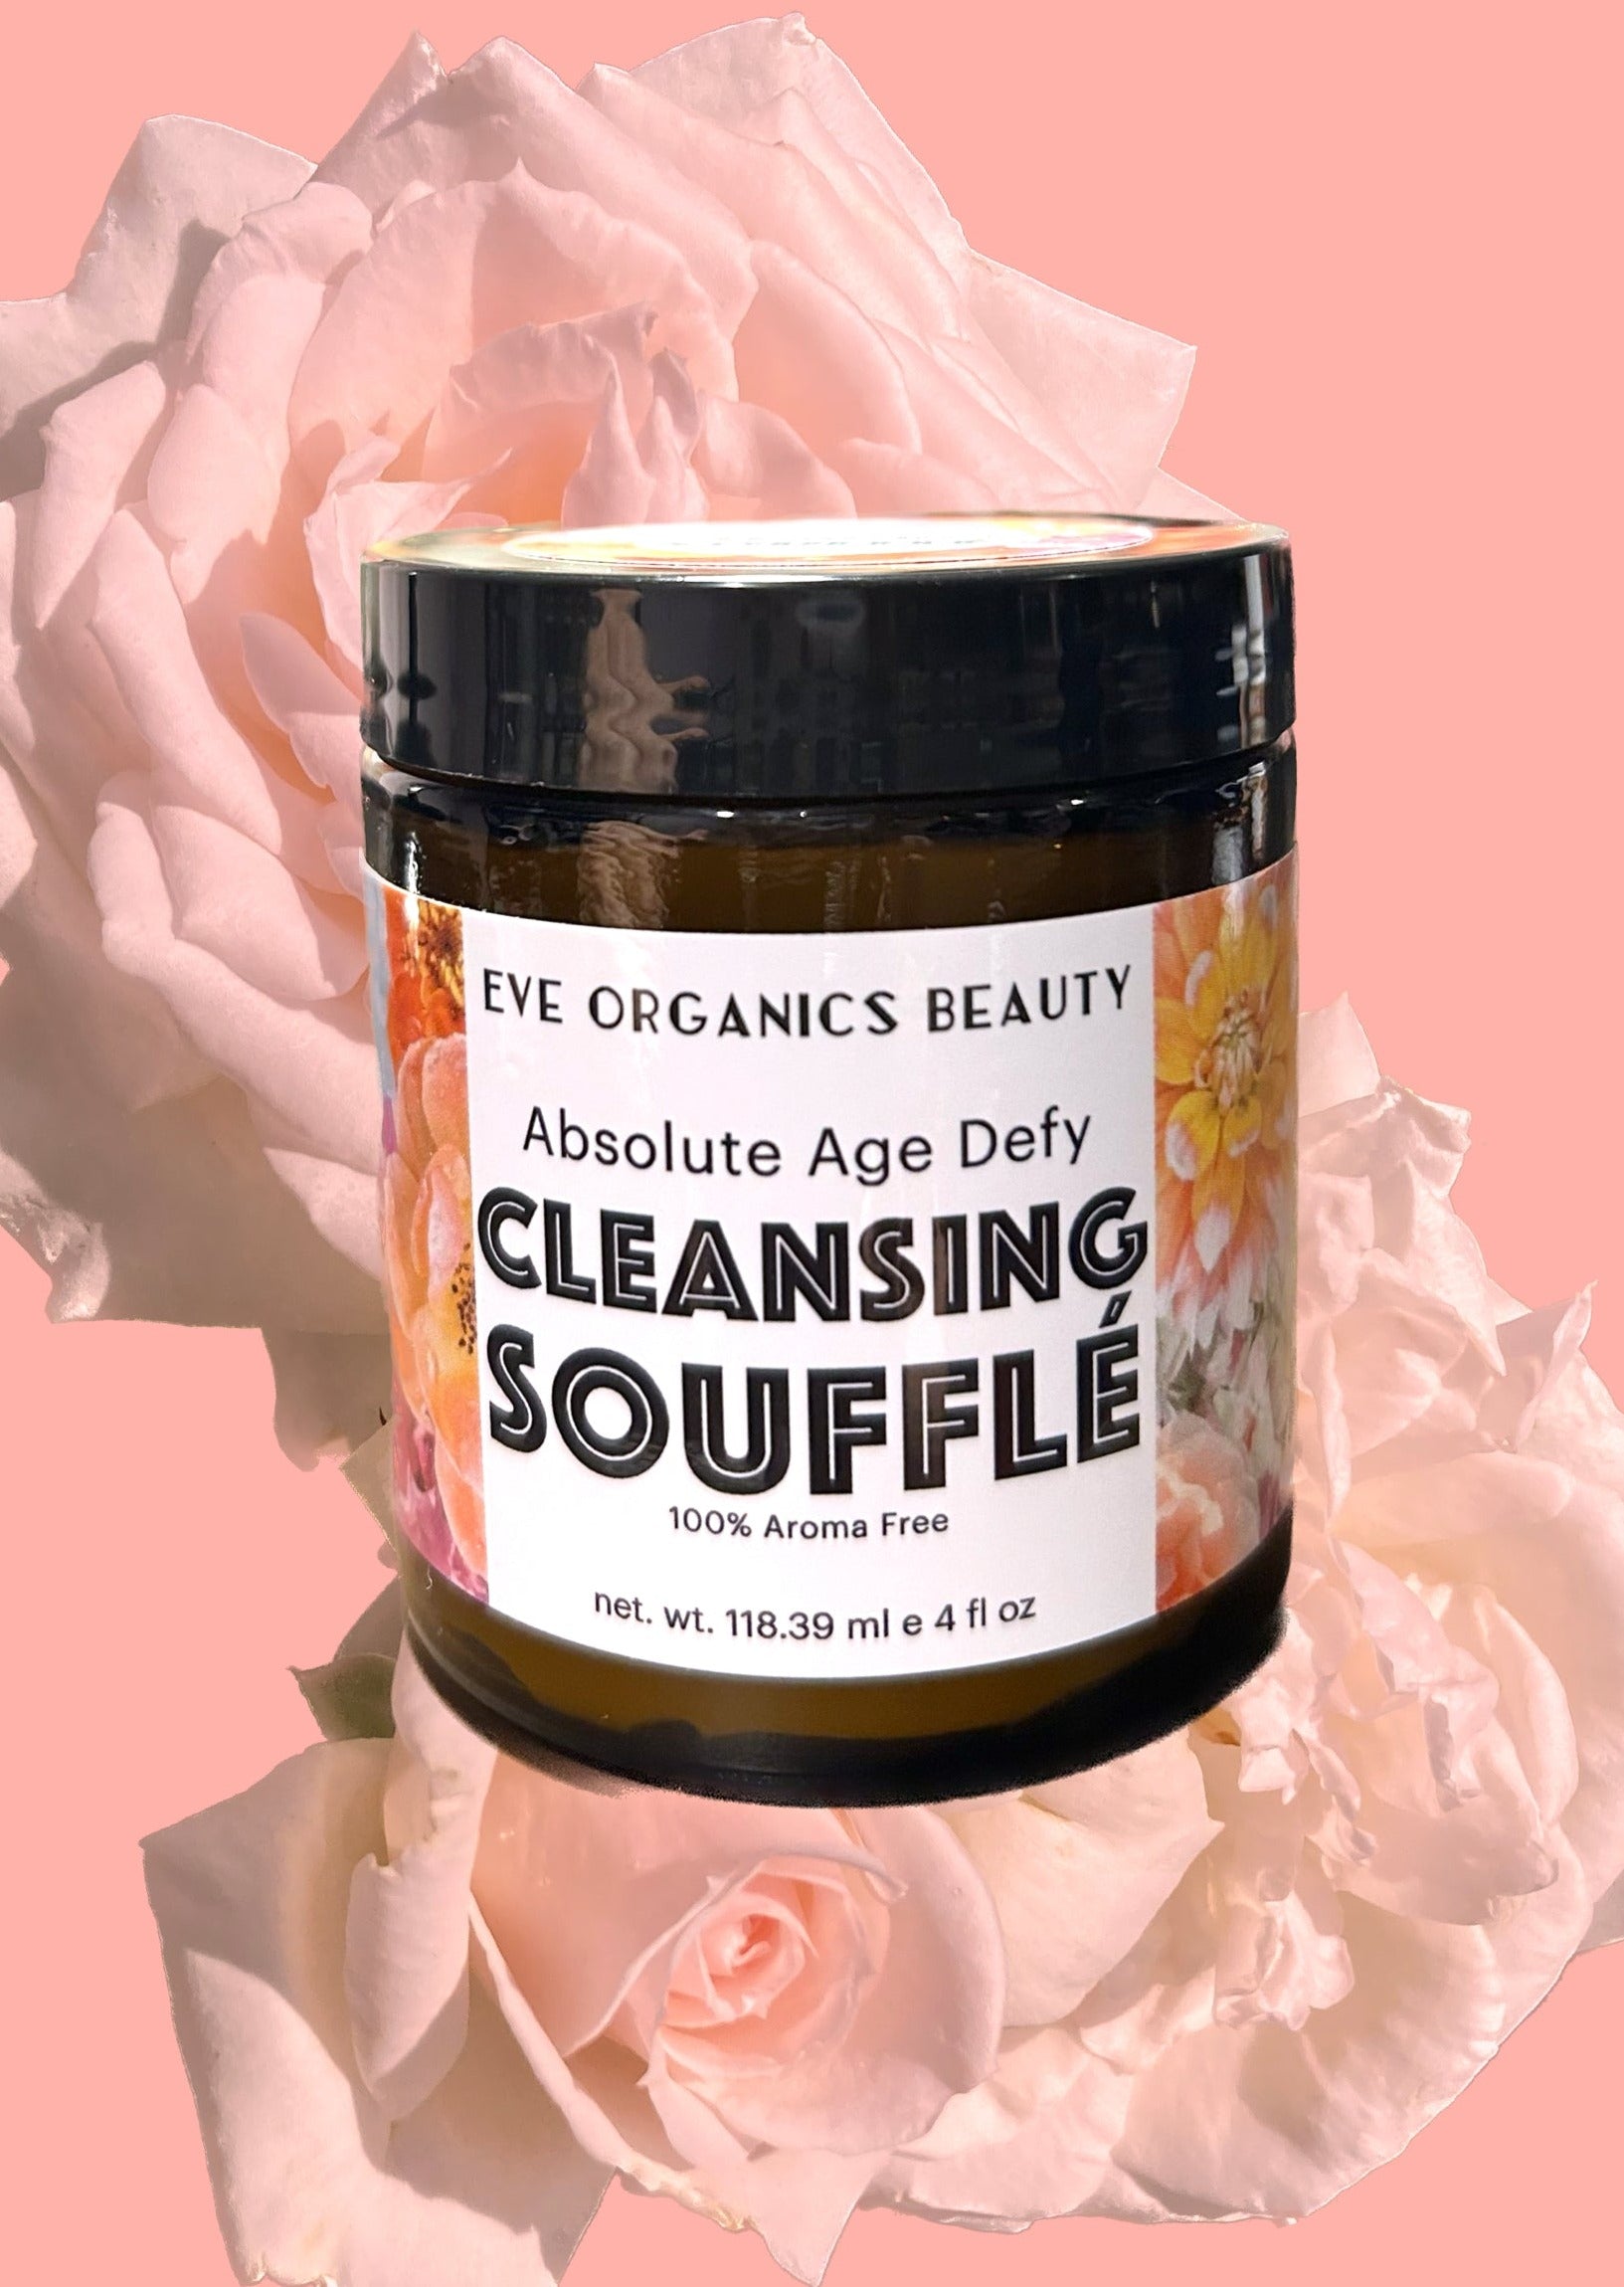 ABSOLUTE AGE DEFY CLEANSING SOUFFLE